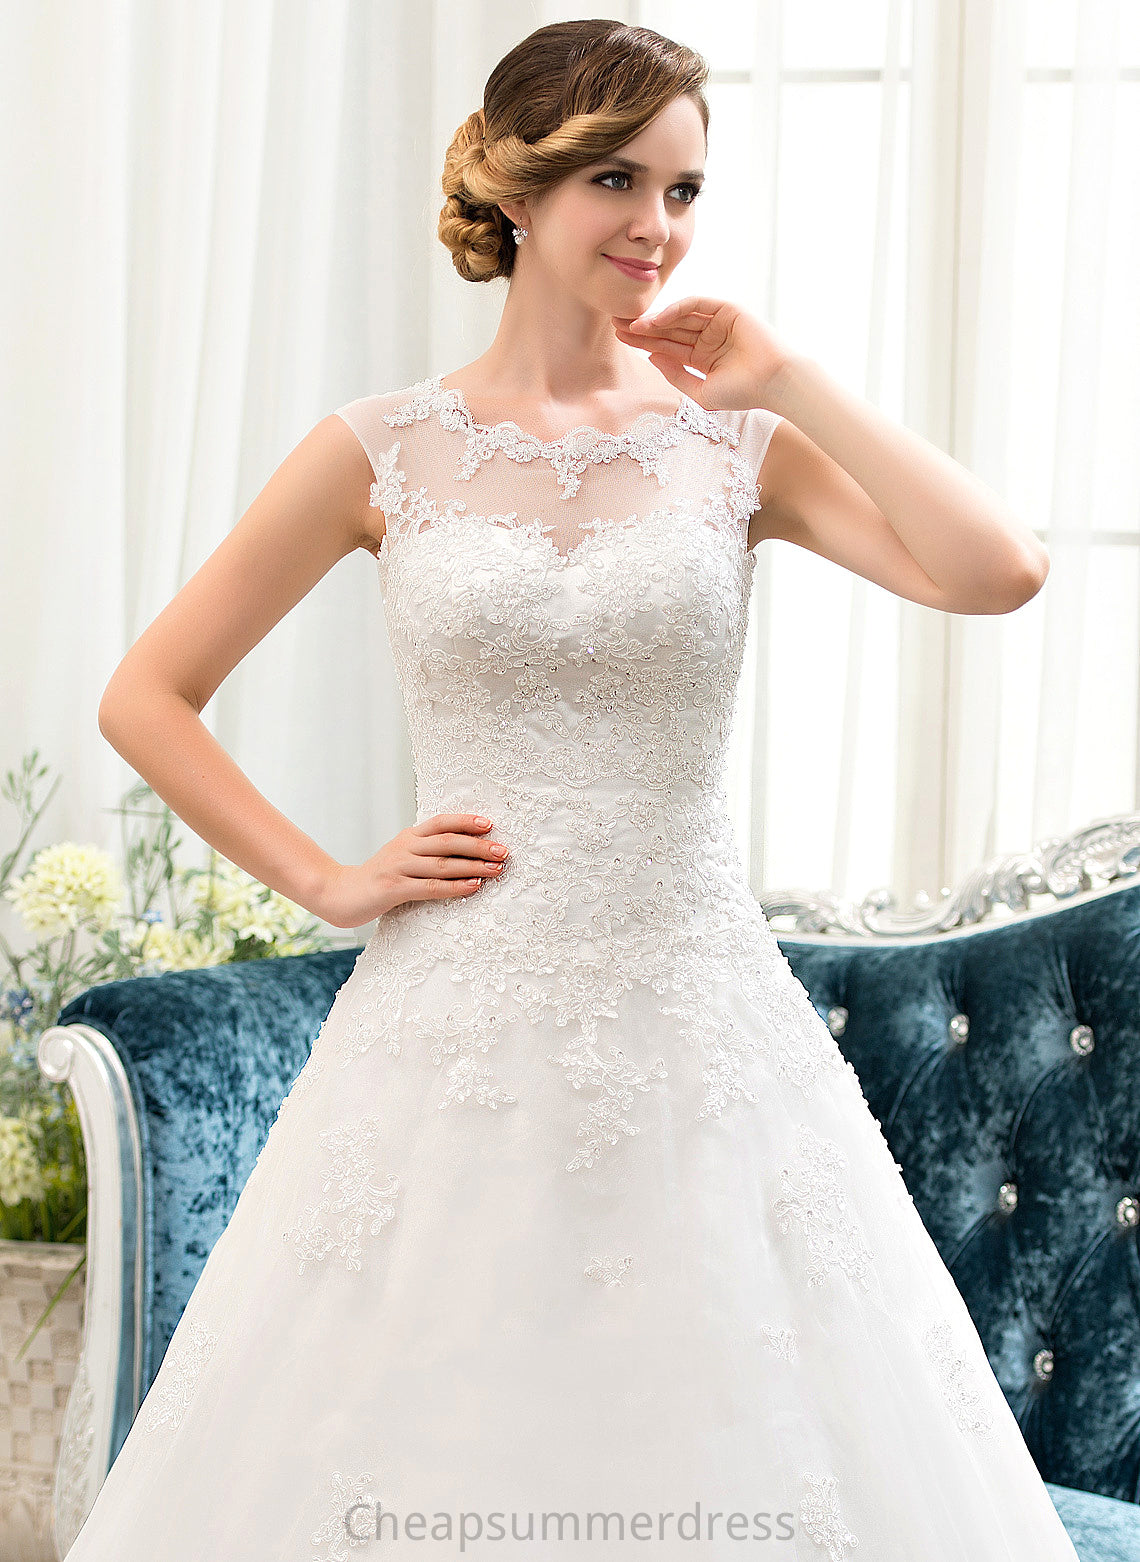 With Wedding Dresses Wedding Sequins Ball-Gown/Princess Dress Beading Deja Organza Sweep Tulle Train Illusion